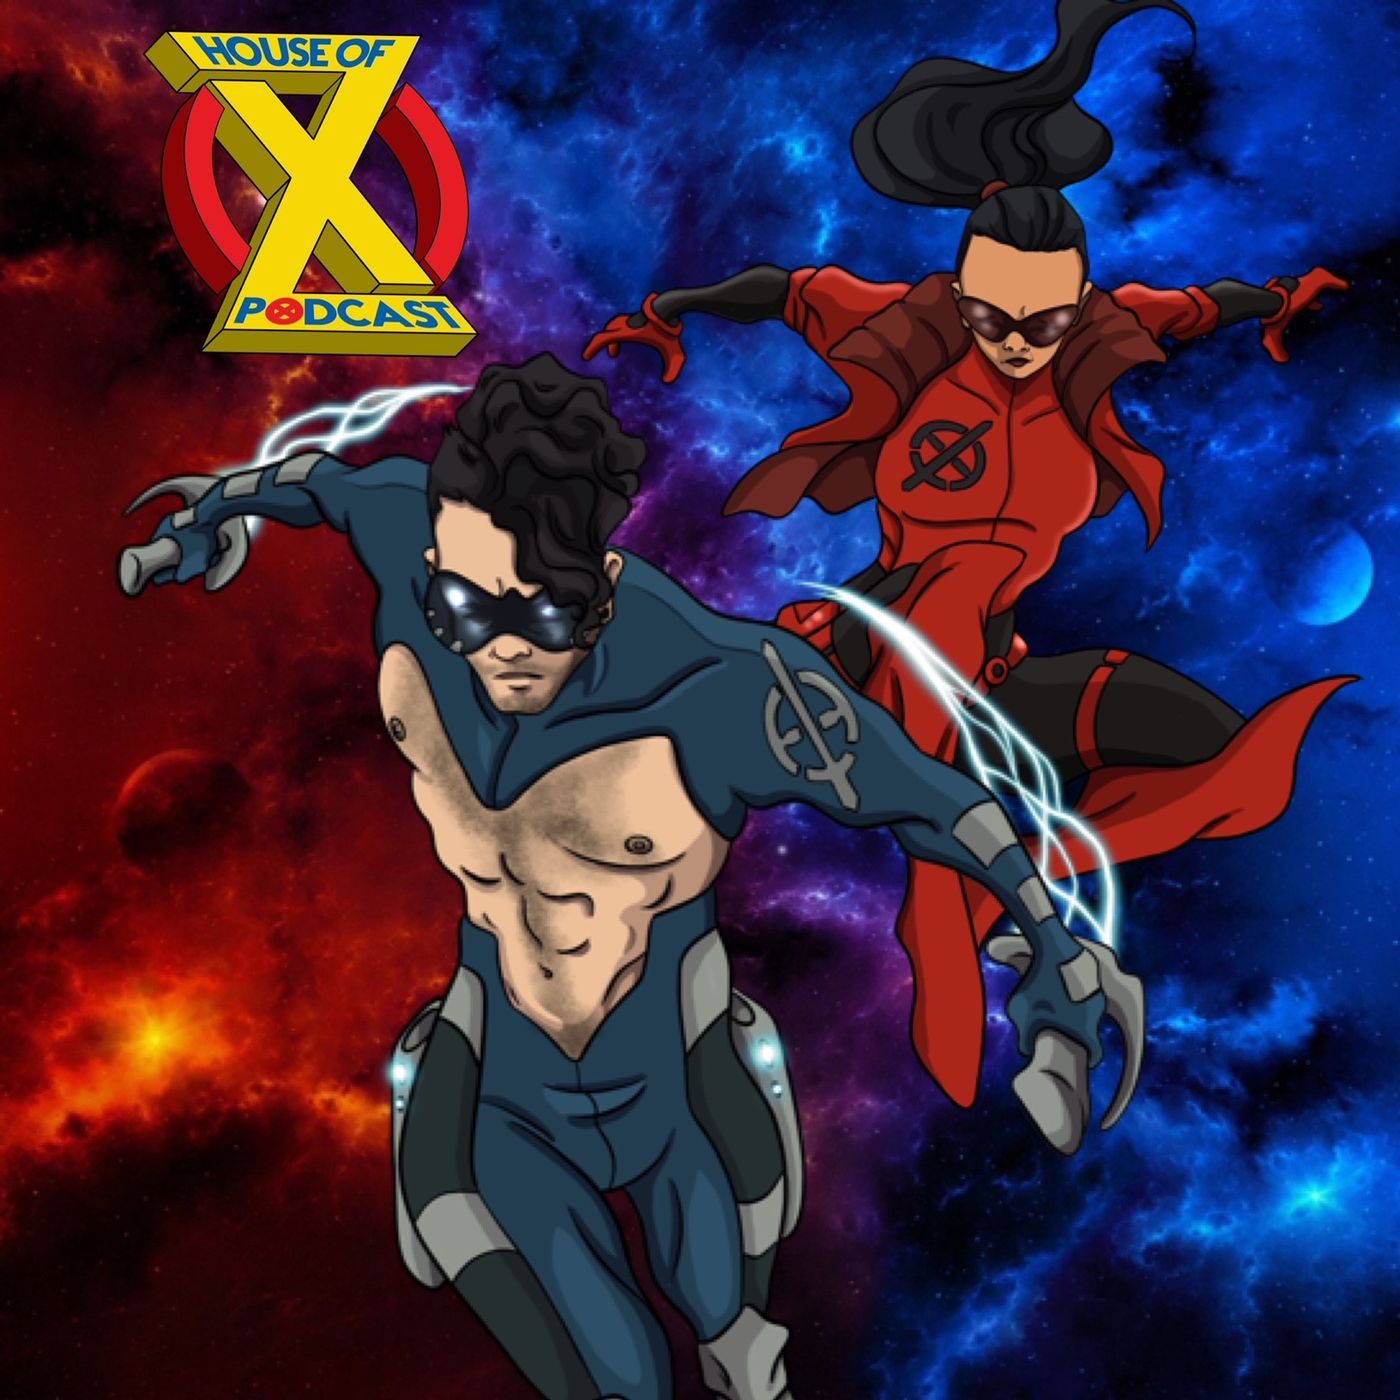 House of X - An X-Men Podcast